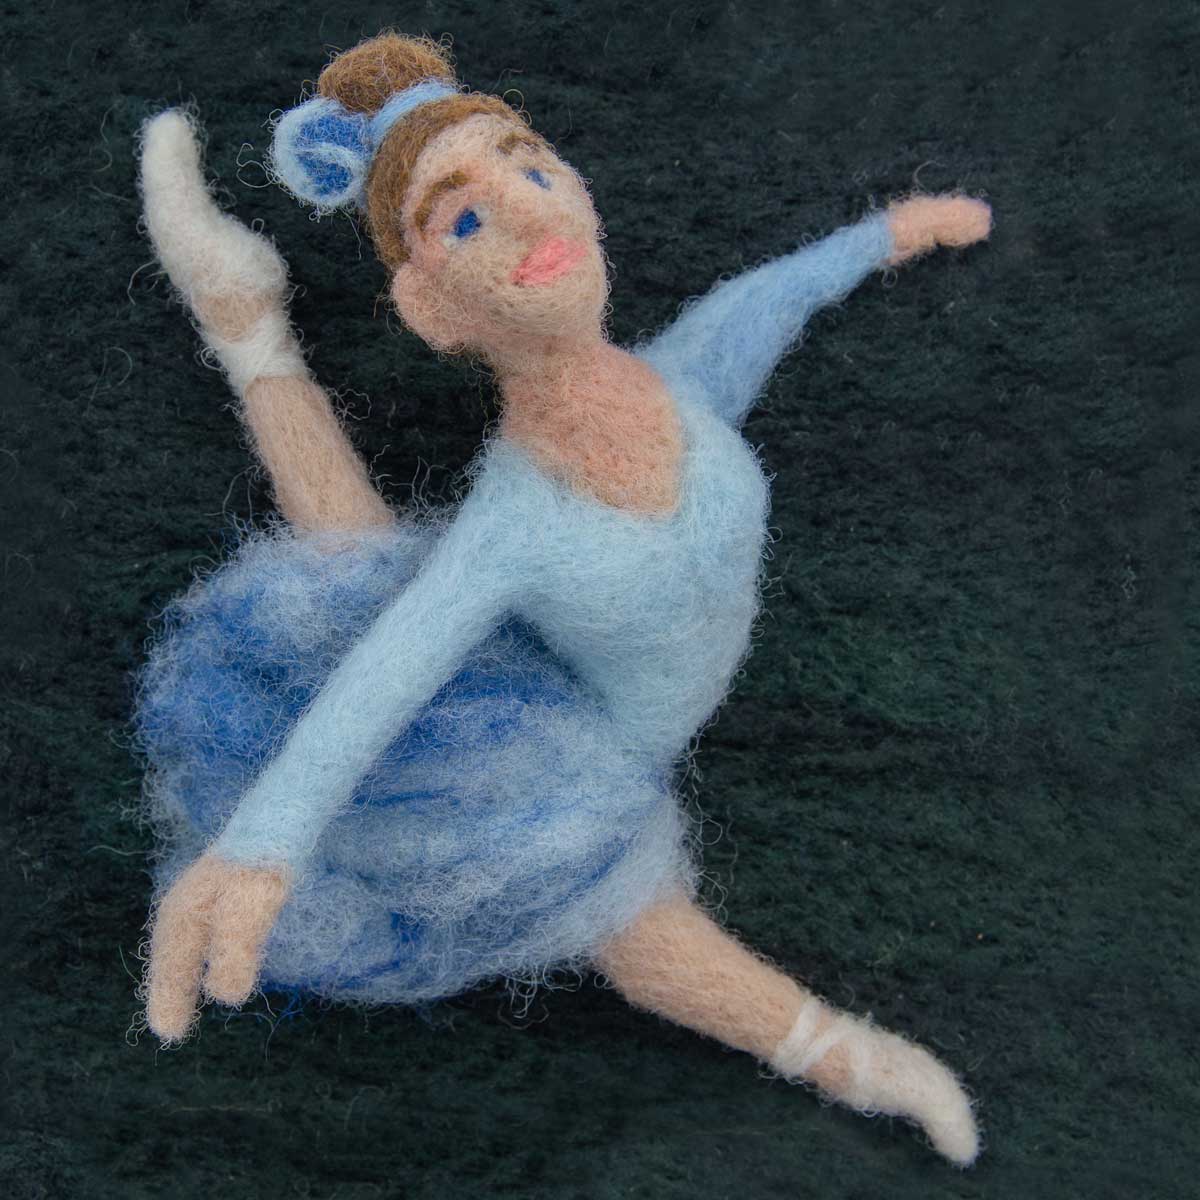 Dancer - Needle Felted Illustration for Hillary Dow's ABC picture book